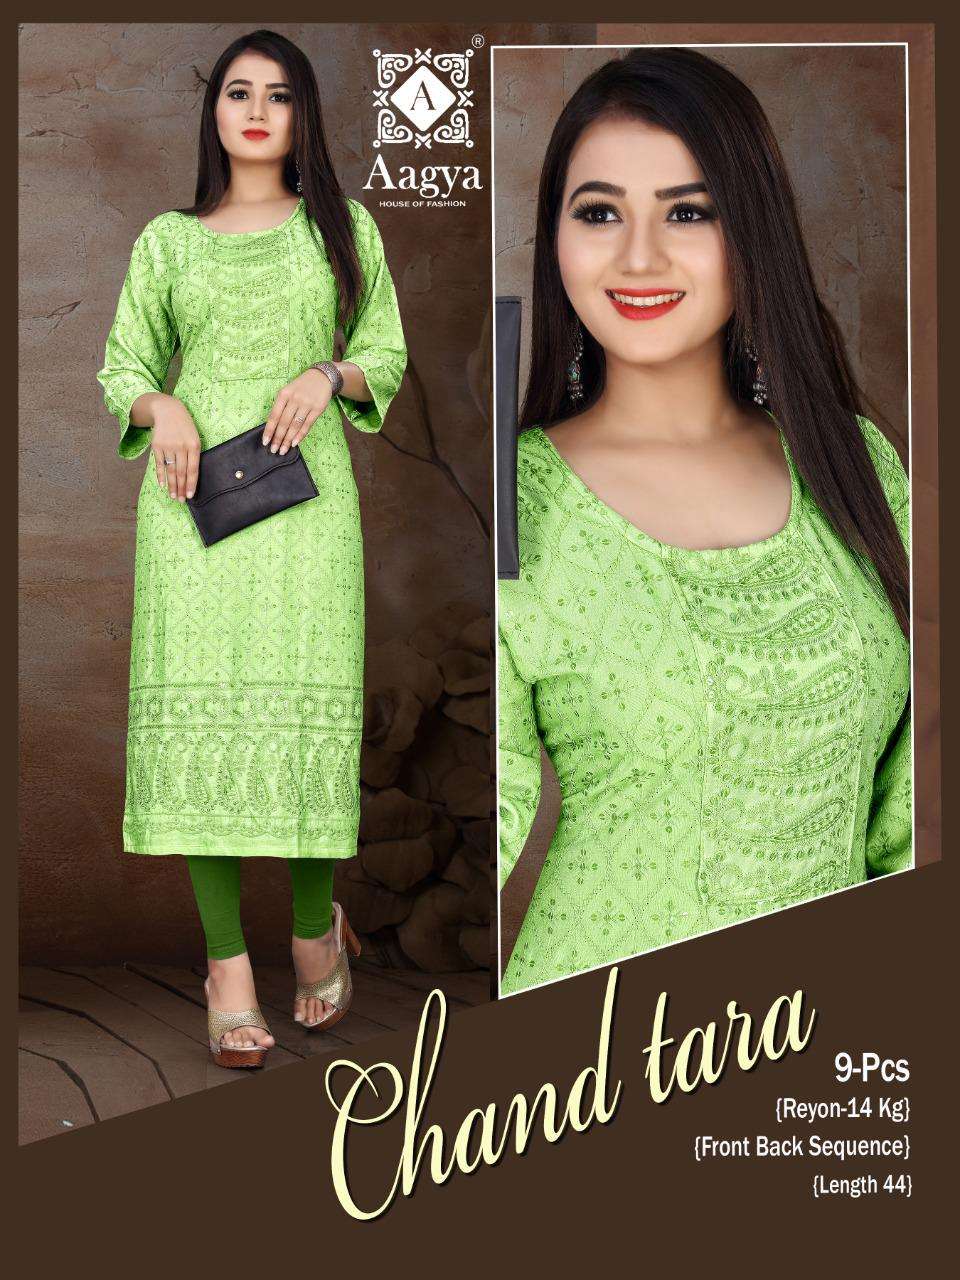 AAGYANEW  Chand Tara HEAVY Sifli Sequence Rayon Front Back Sequence Work KURTI CATALOG WHOLESALER BEST RATE